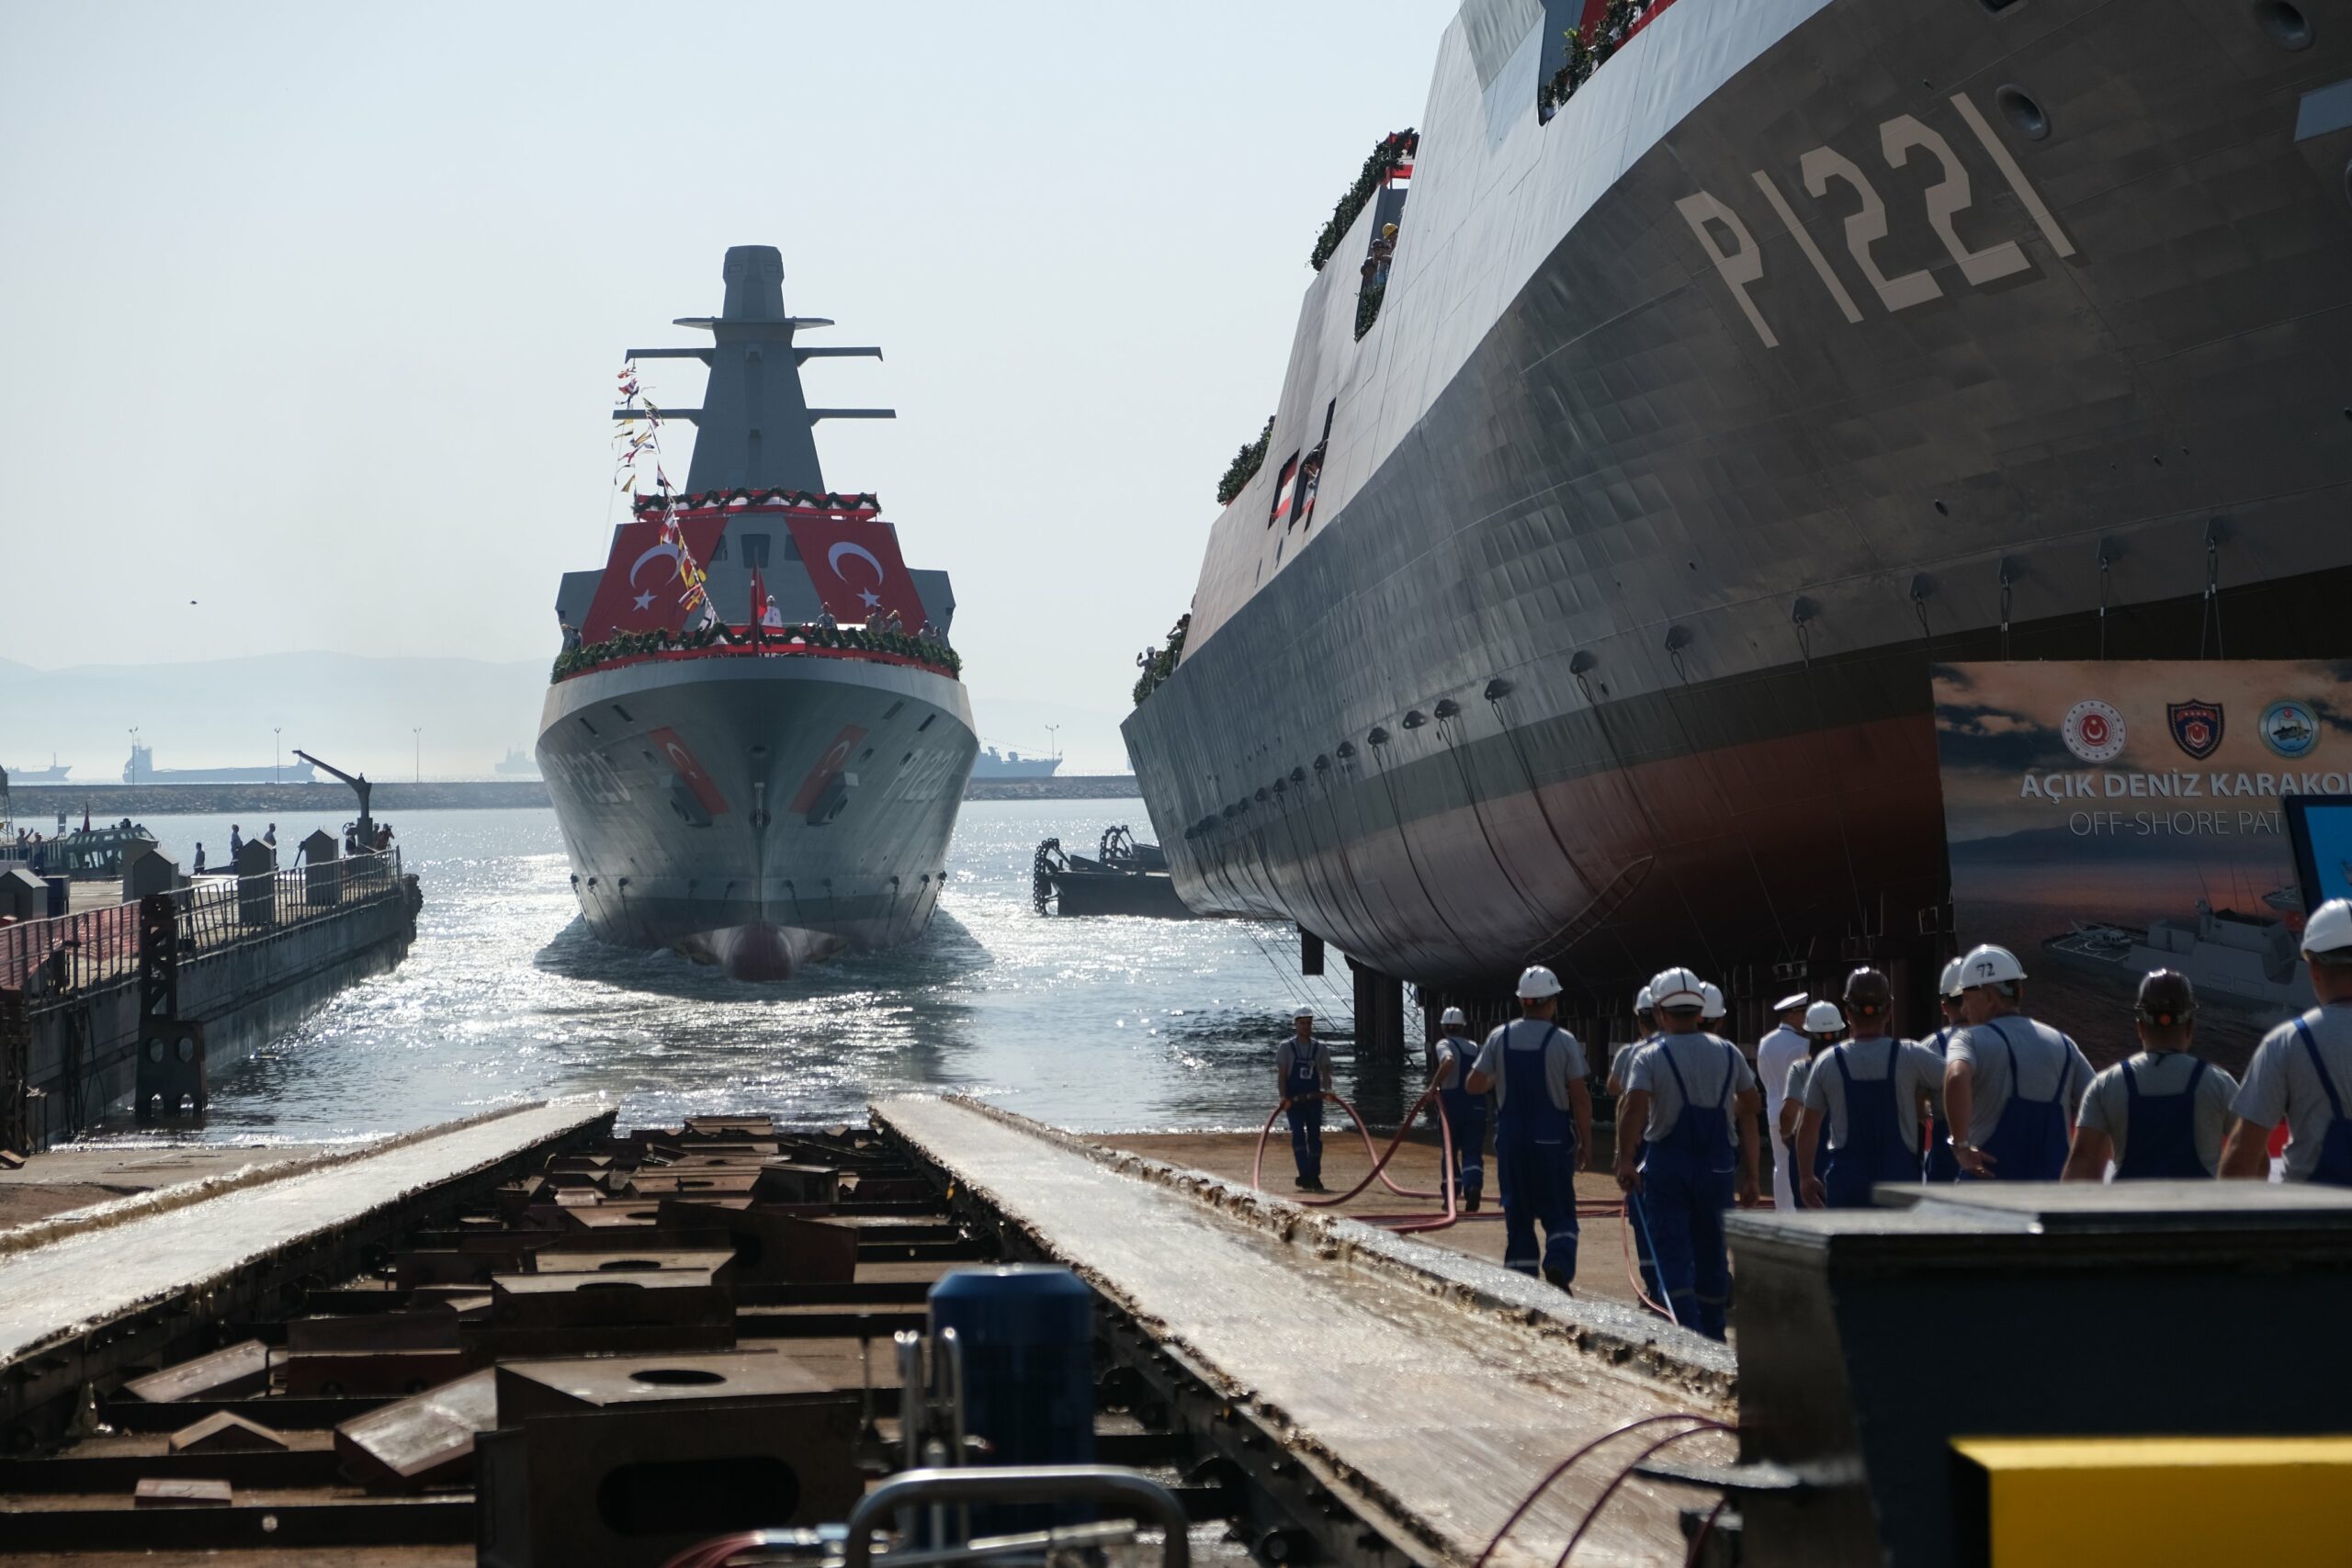 Turkey's new offshore patrol vessels, AKHİSAR ( P-1220) and KOÇHİSAR (P-1221) are seen on a dock, with P-1220 already on the water and P-1221 on the ready for launch. Dock workers can be seen on the ground, by the side of P-1221. Both ships are adorned with wreaths and flags of Turkey.